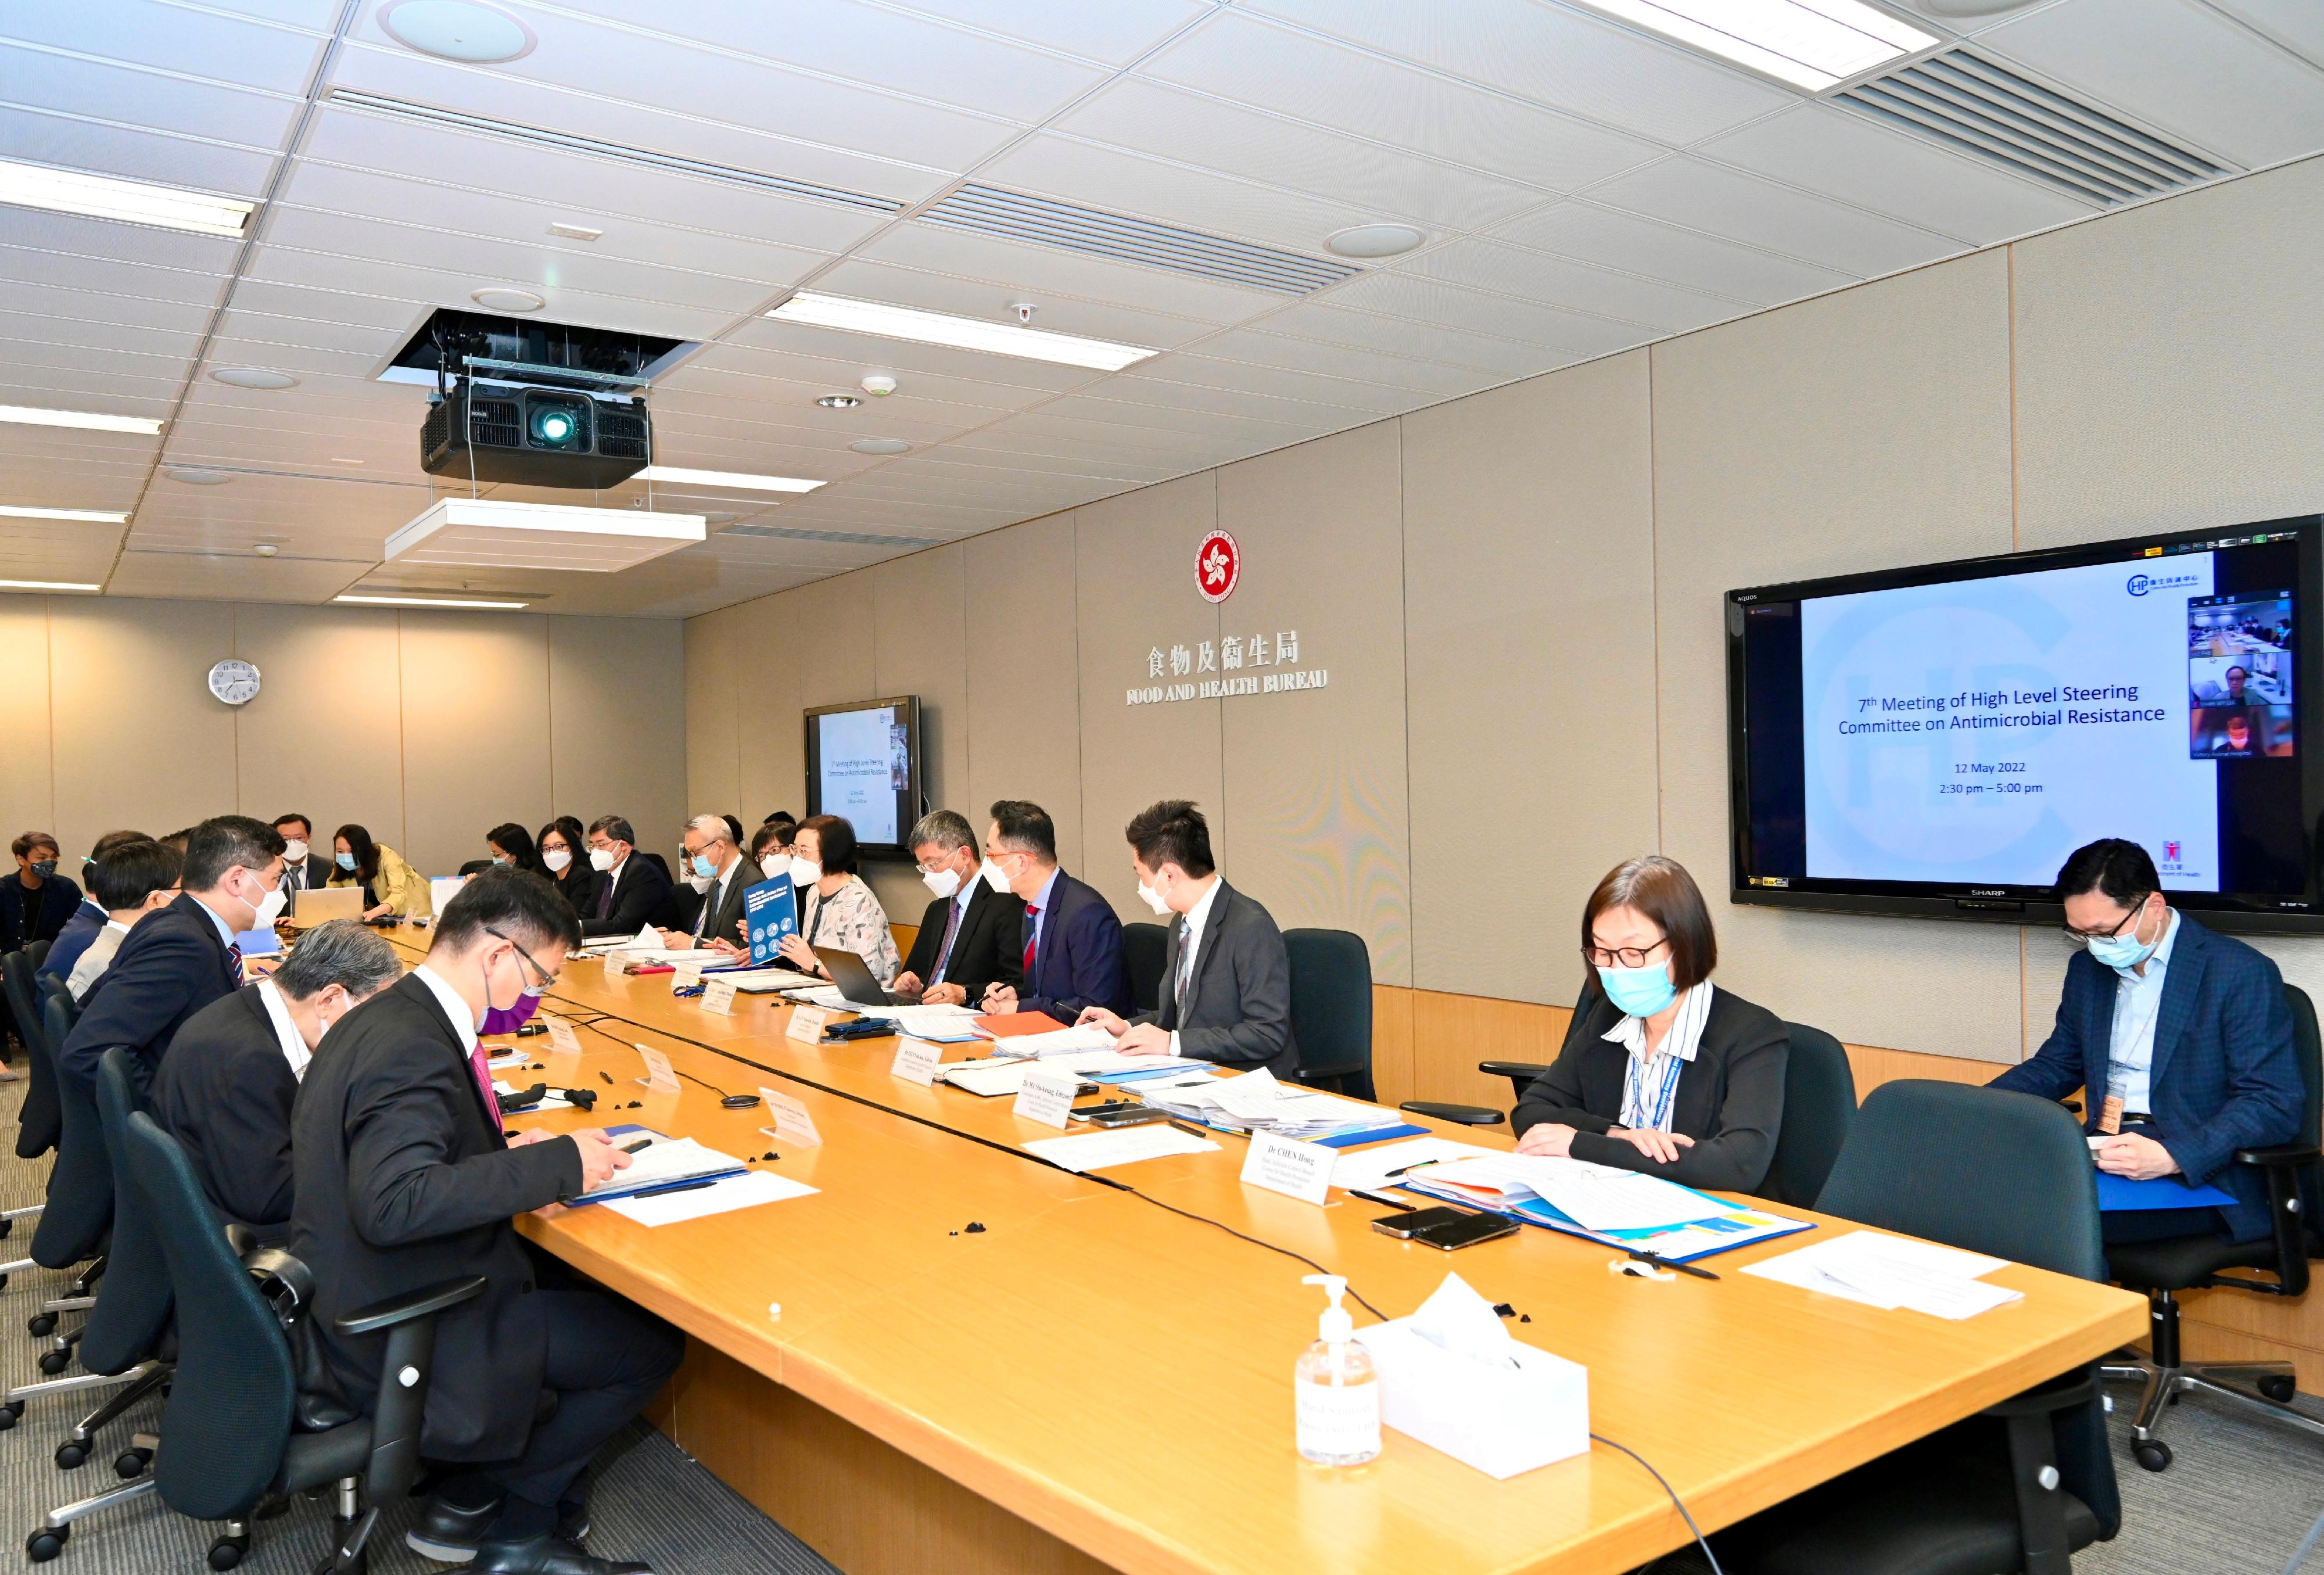 The Food and Health Bureau today (May 12) convened the seventh meeting of the High Level Steering Committee on Antimicrobial Resistance to summarise the experience in the implementation of the Hong Kong Strategy and Action Plan on Antimicrobial Resistance (2017-2022) in the past five years.